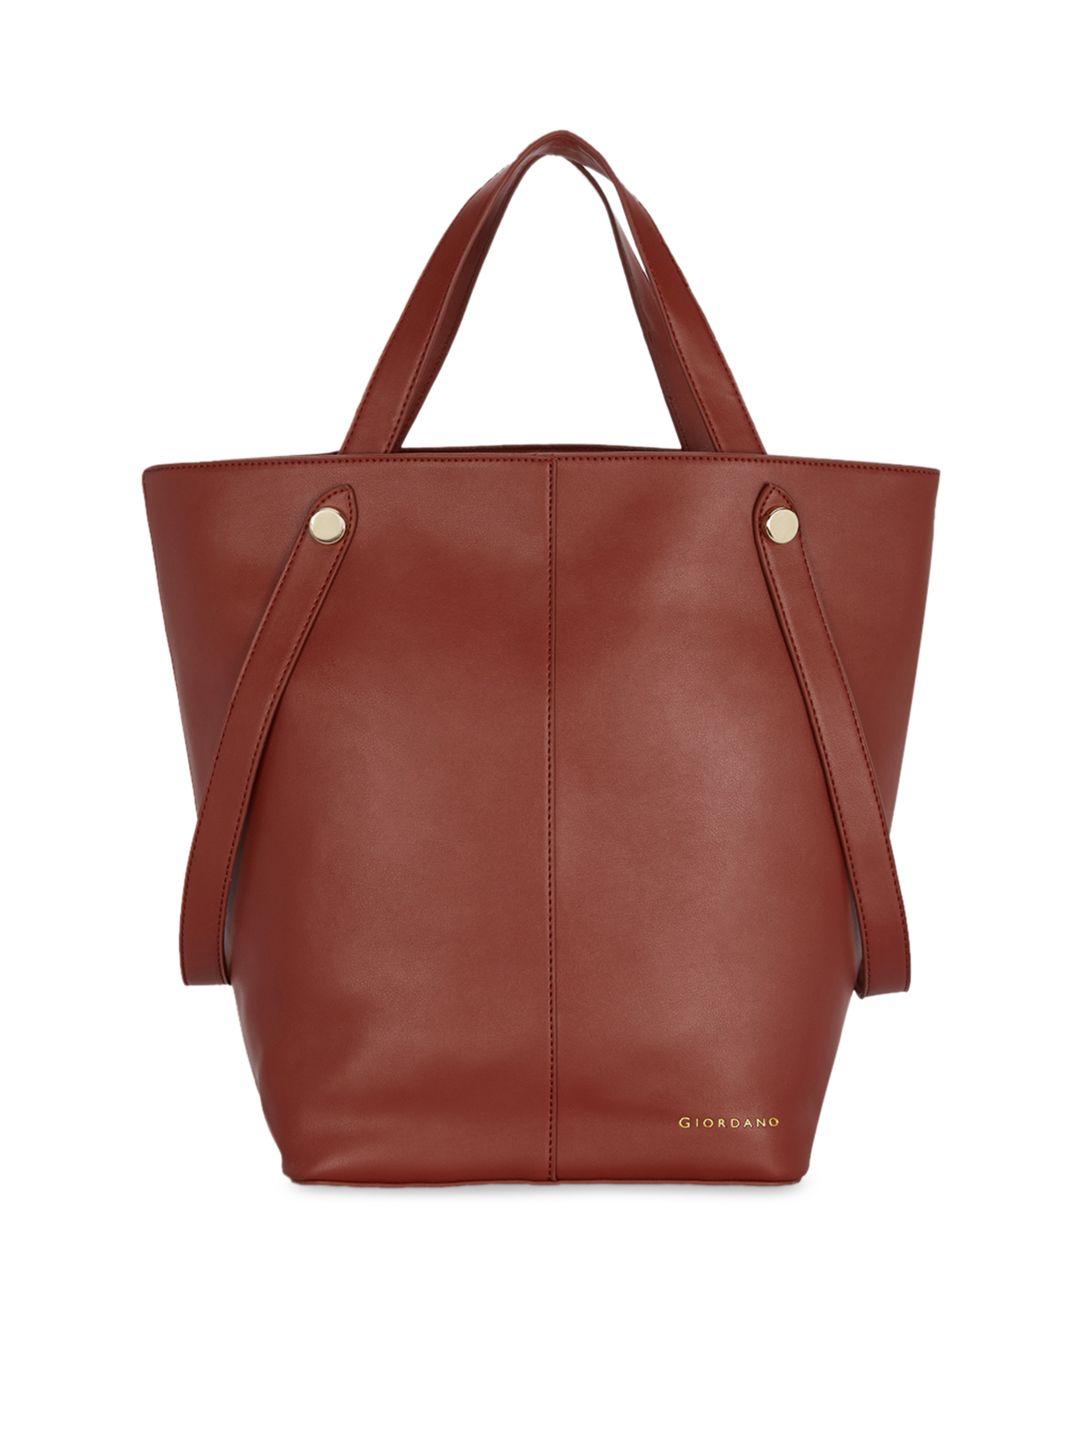 giordano brown solid tote bag